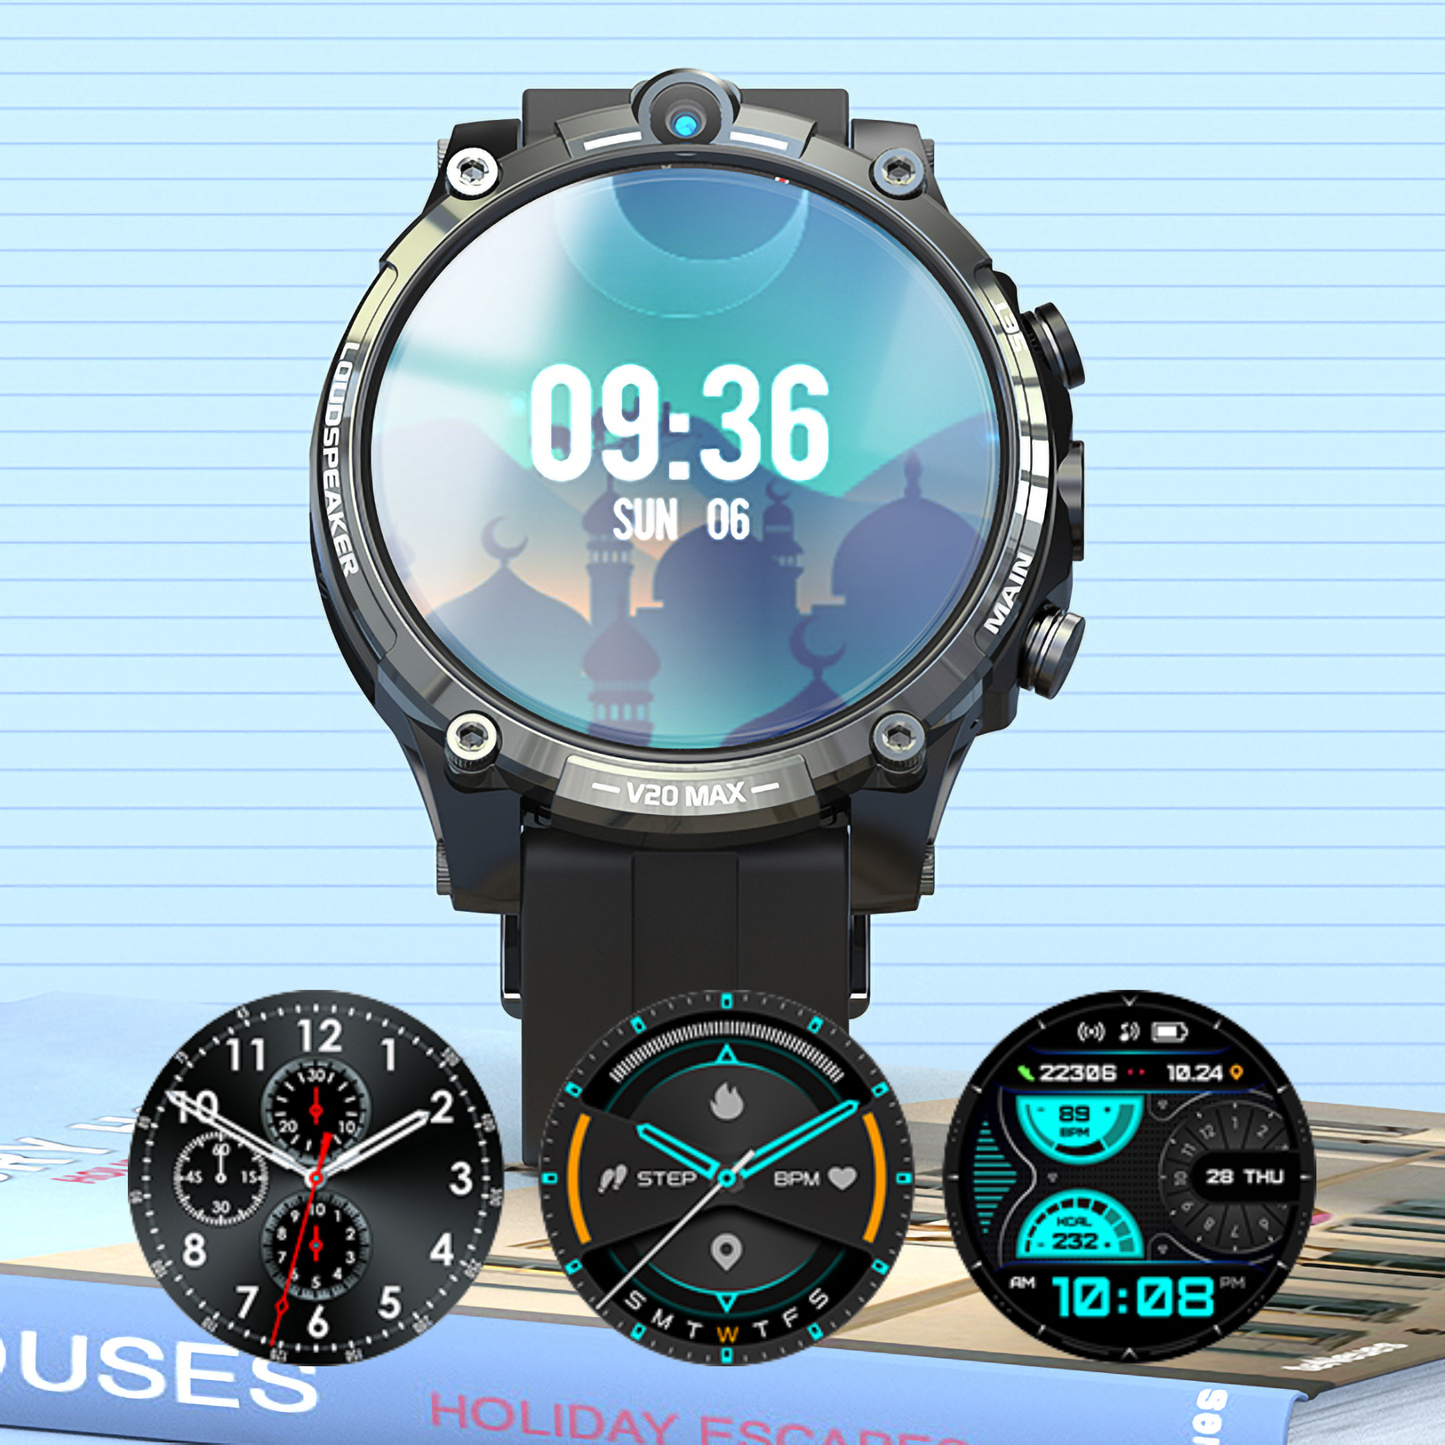 4G Smartwatch with Dual Cameras, Independent Device for Photos and Videos, All Network Compatible, App Downloadable